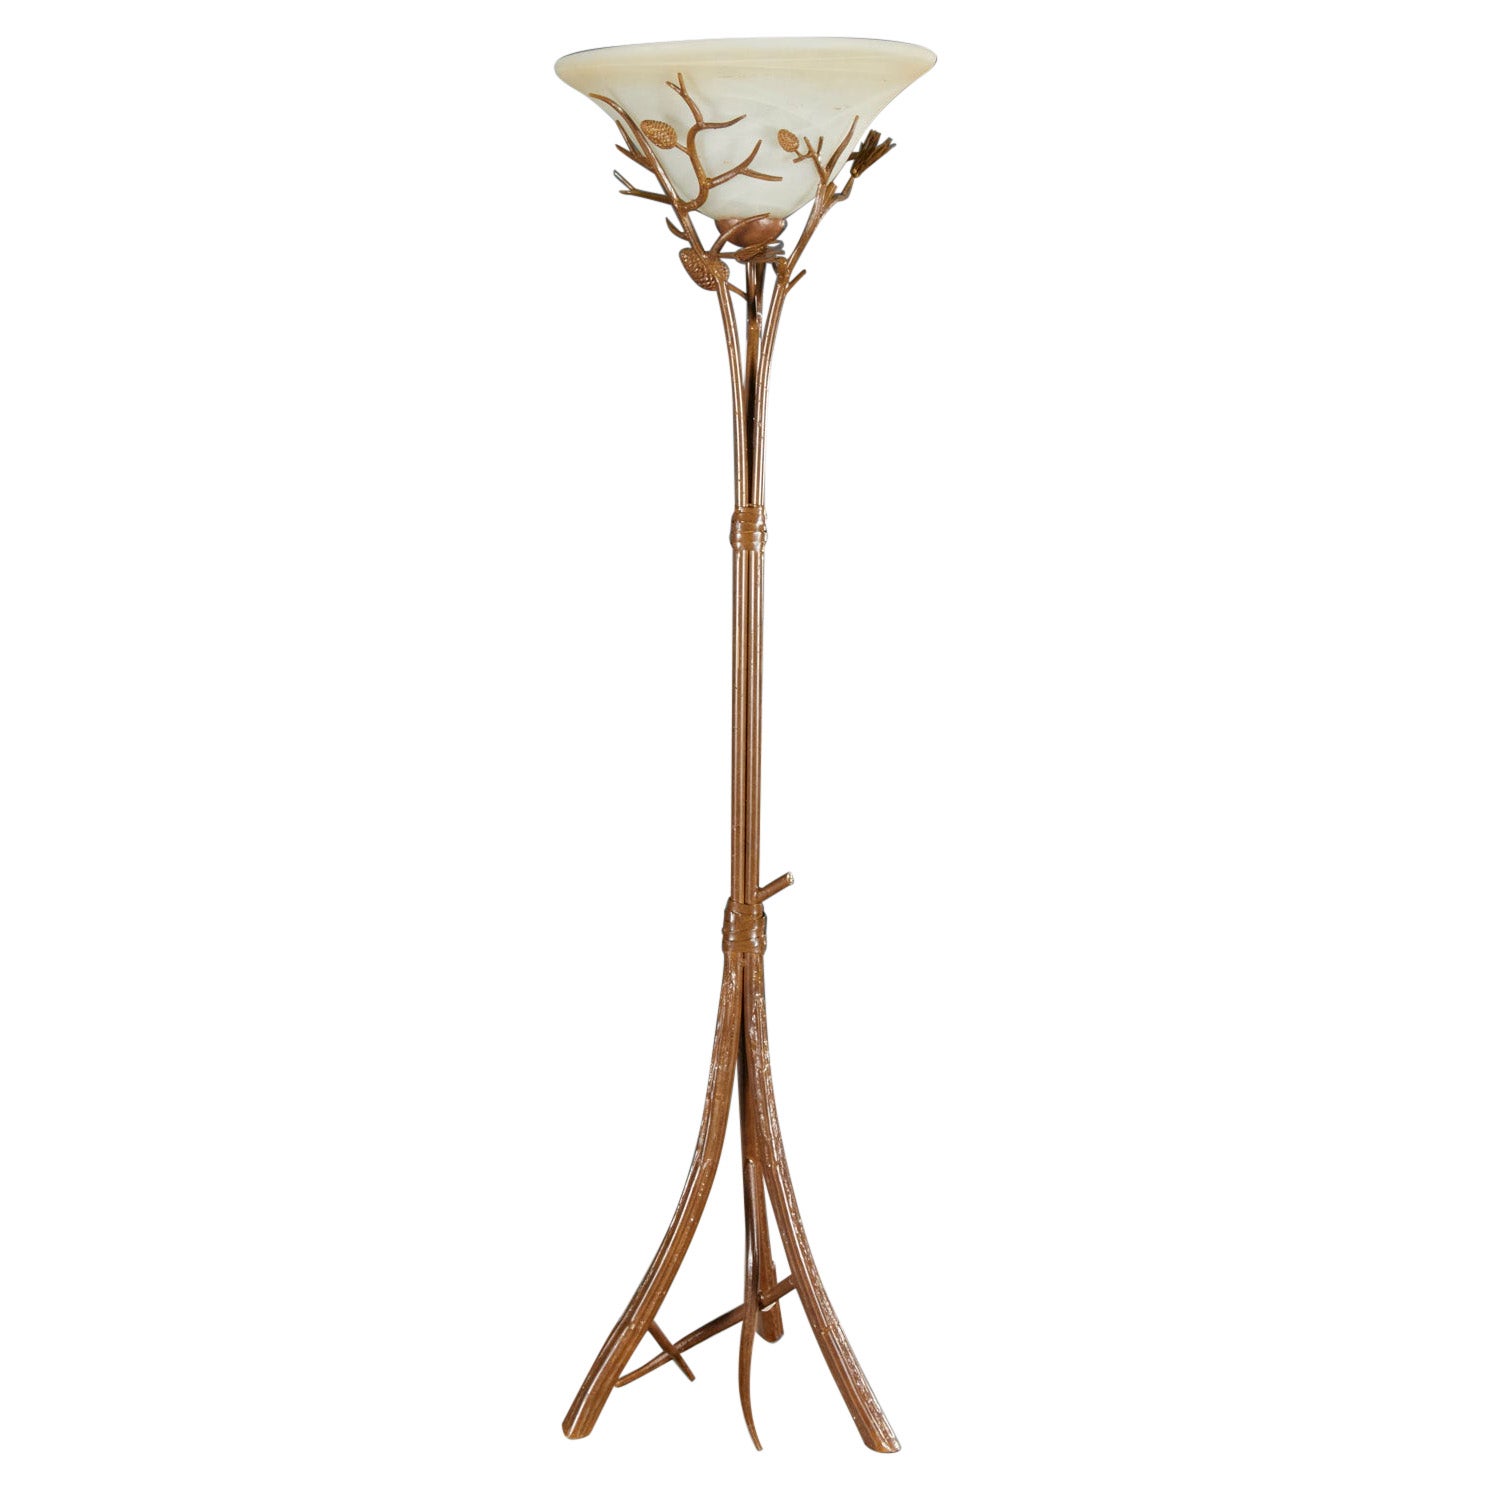 Contemporary Faux Bois Torchiere Floor Lamp with Fir Pine Cones and Needles